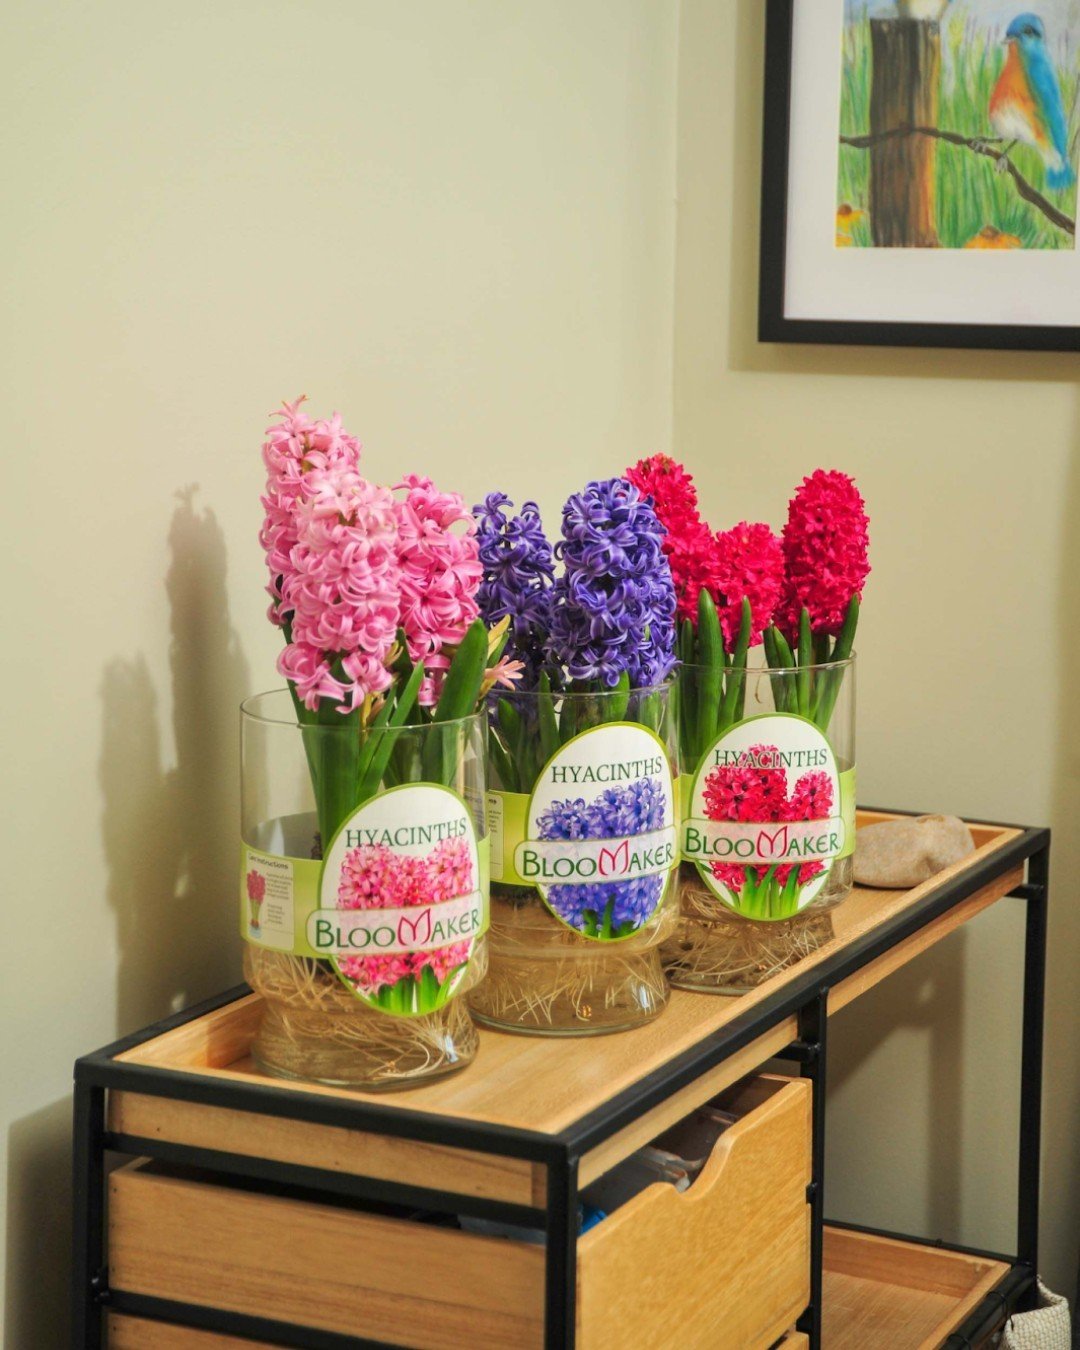 Top Tip Tuesday: Our hydroponic Hyacinths do best in bright in bright light, but it is best to not keep them in direct sunlight or heat. 🌞 Some great places to keep your hyacinths would be in your kitchen or office! 💐💮
.
.
.
.
#Bloomaker #Flowers 